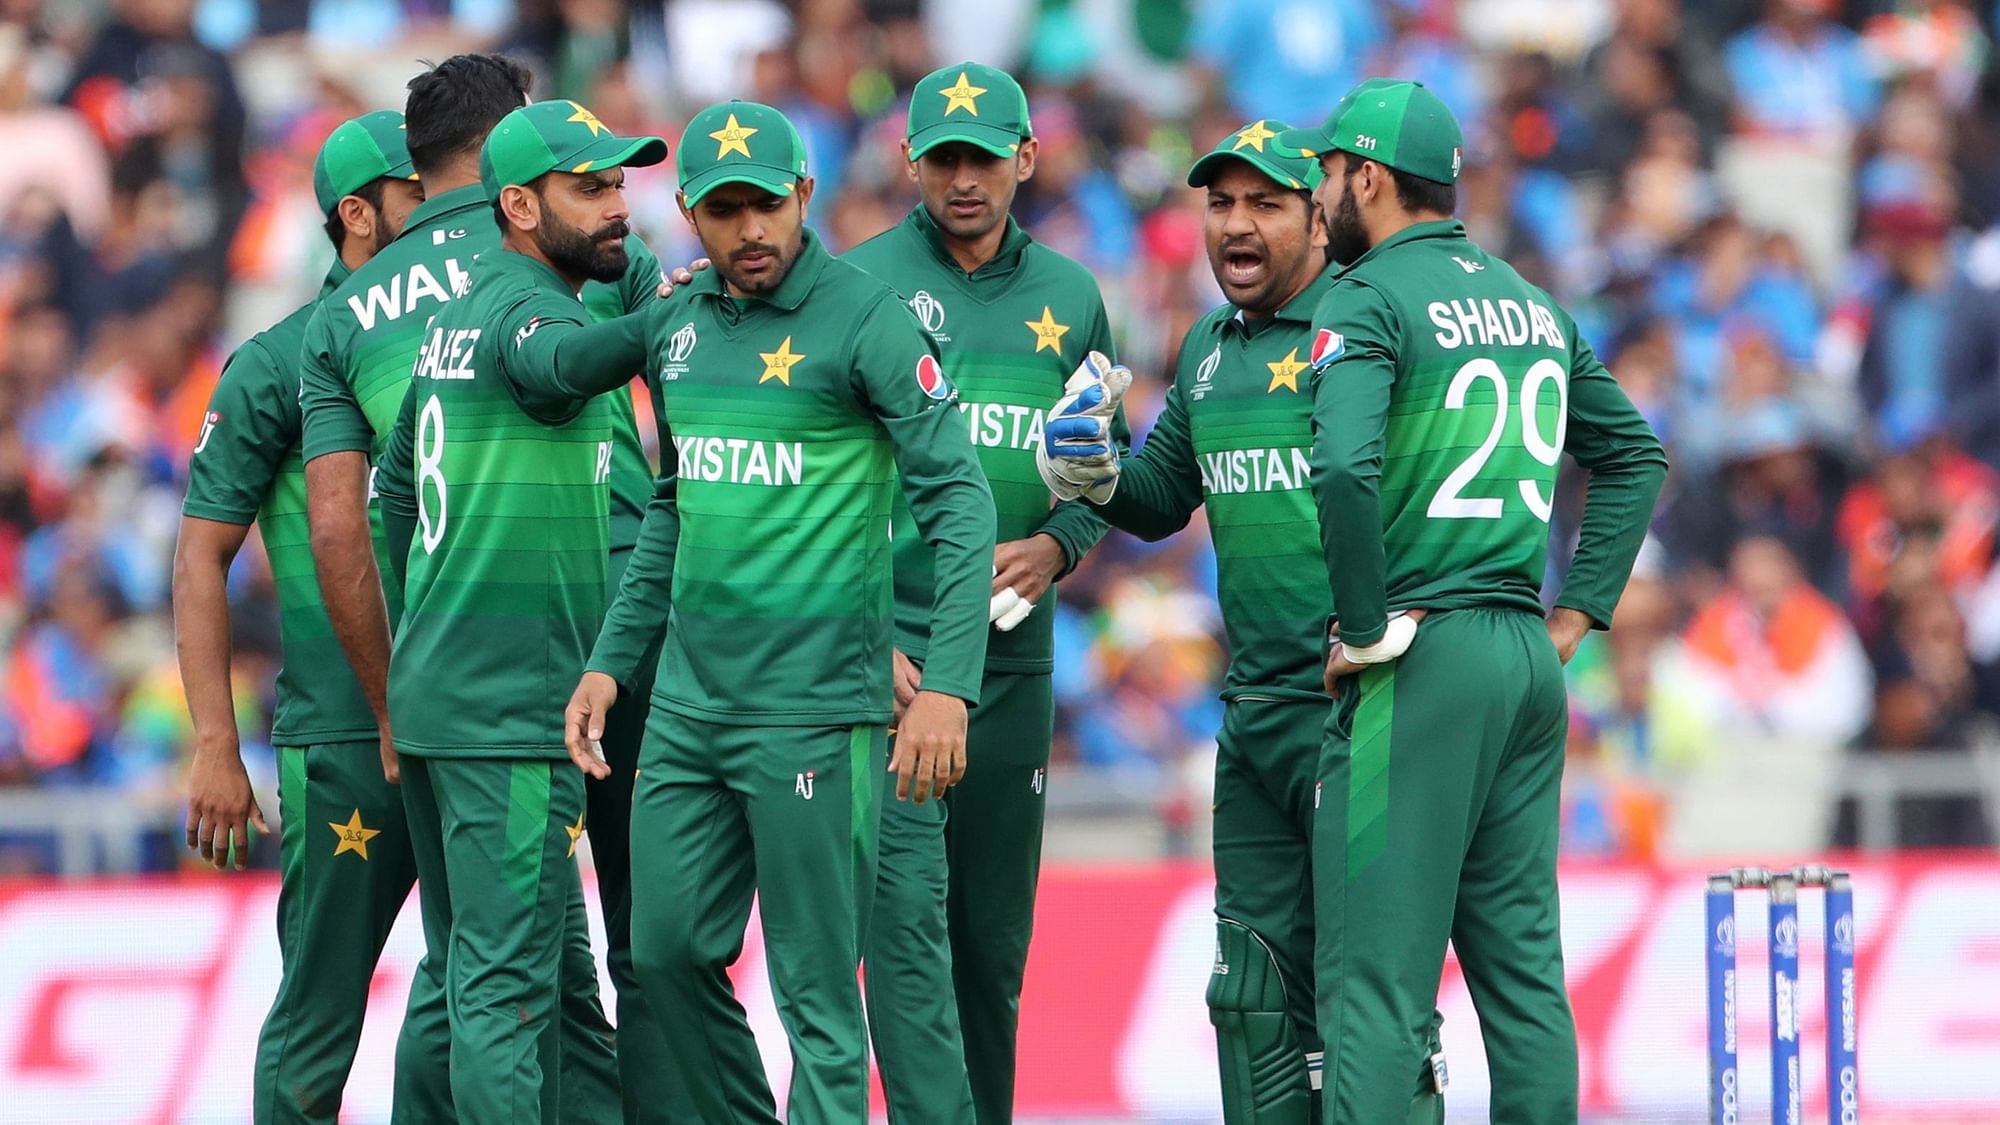 Pakistan are now placed ninth out of 10 teams in the points table.